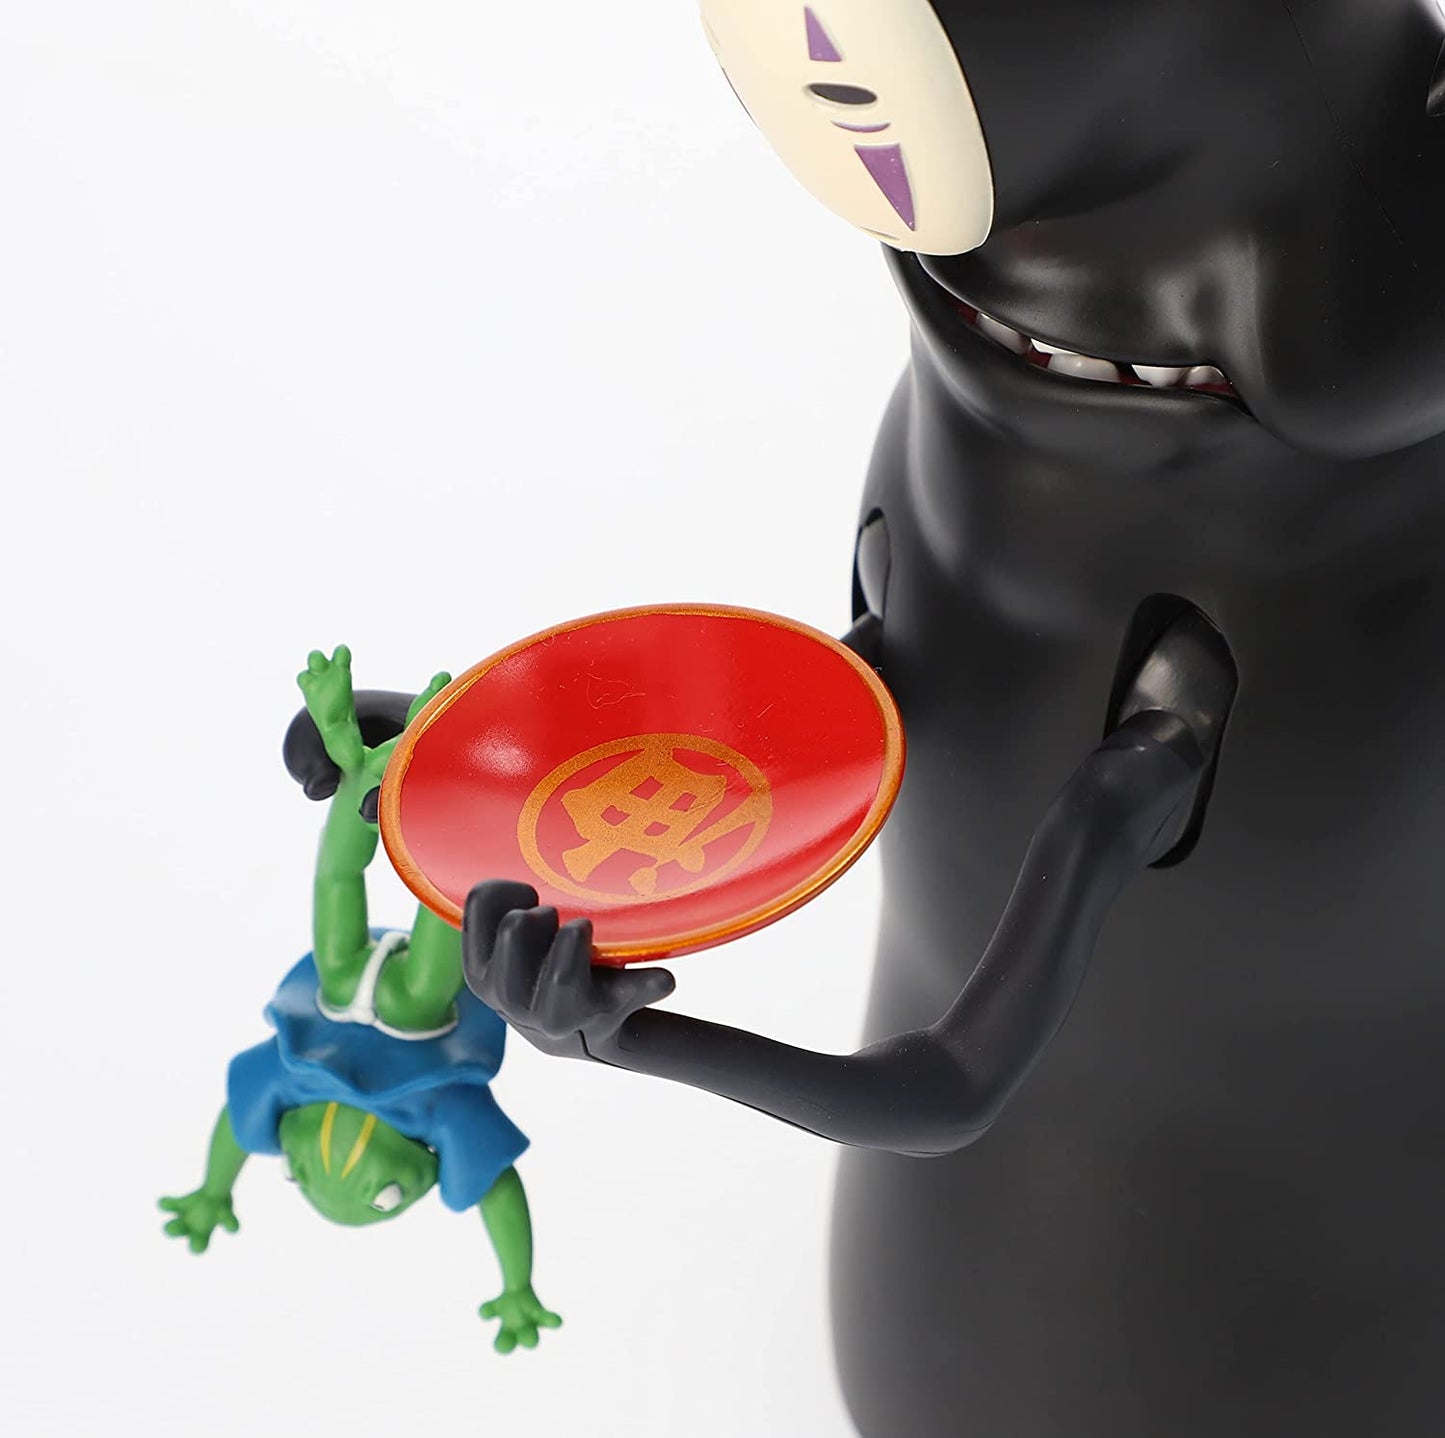 Spirited Away More! No Face Coin Munching Bank Figure - Official Studio Ghibli Merchandise Super Anime Store 